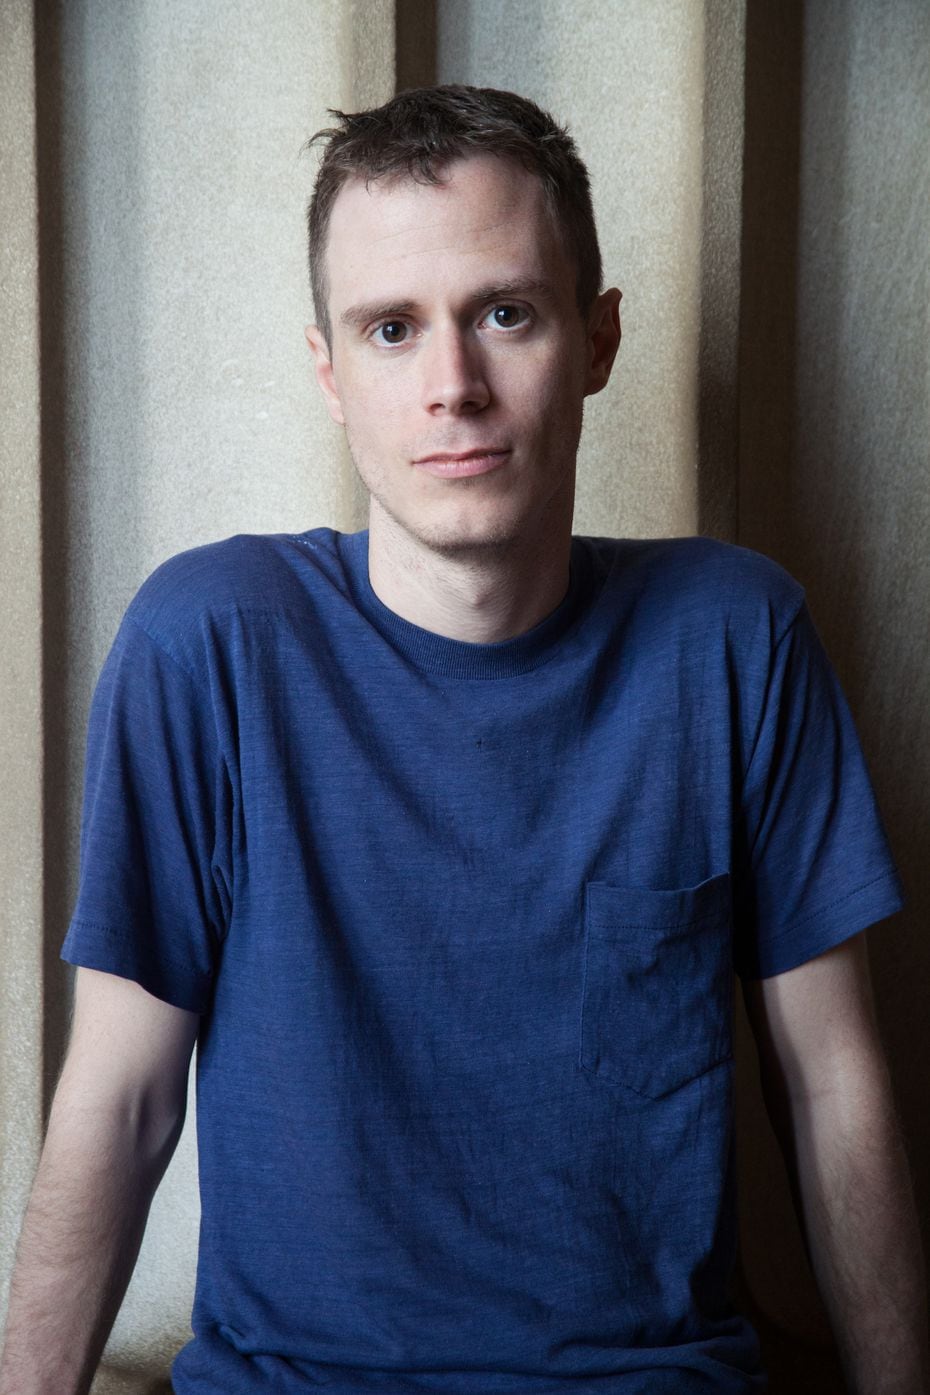 In addition to Angel Olsen, producer John Congleton has worked with St. Vincent, Sarah Jaffe and many others.